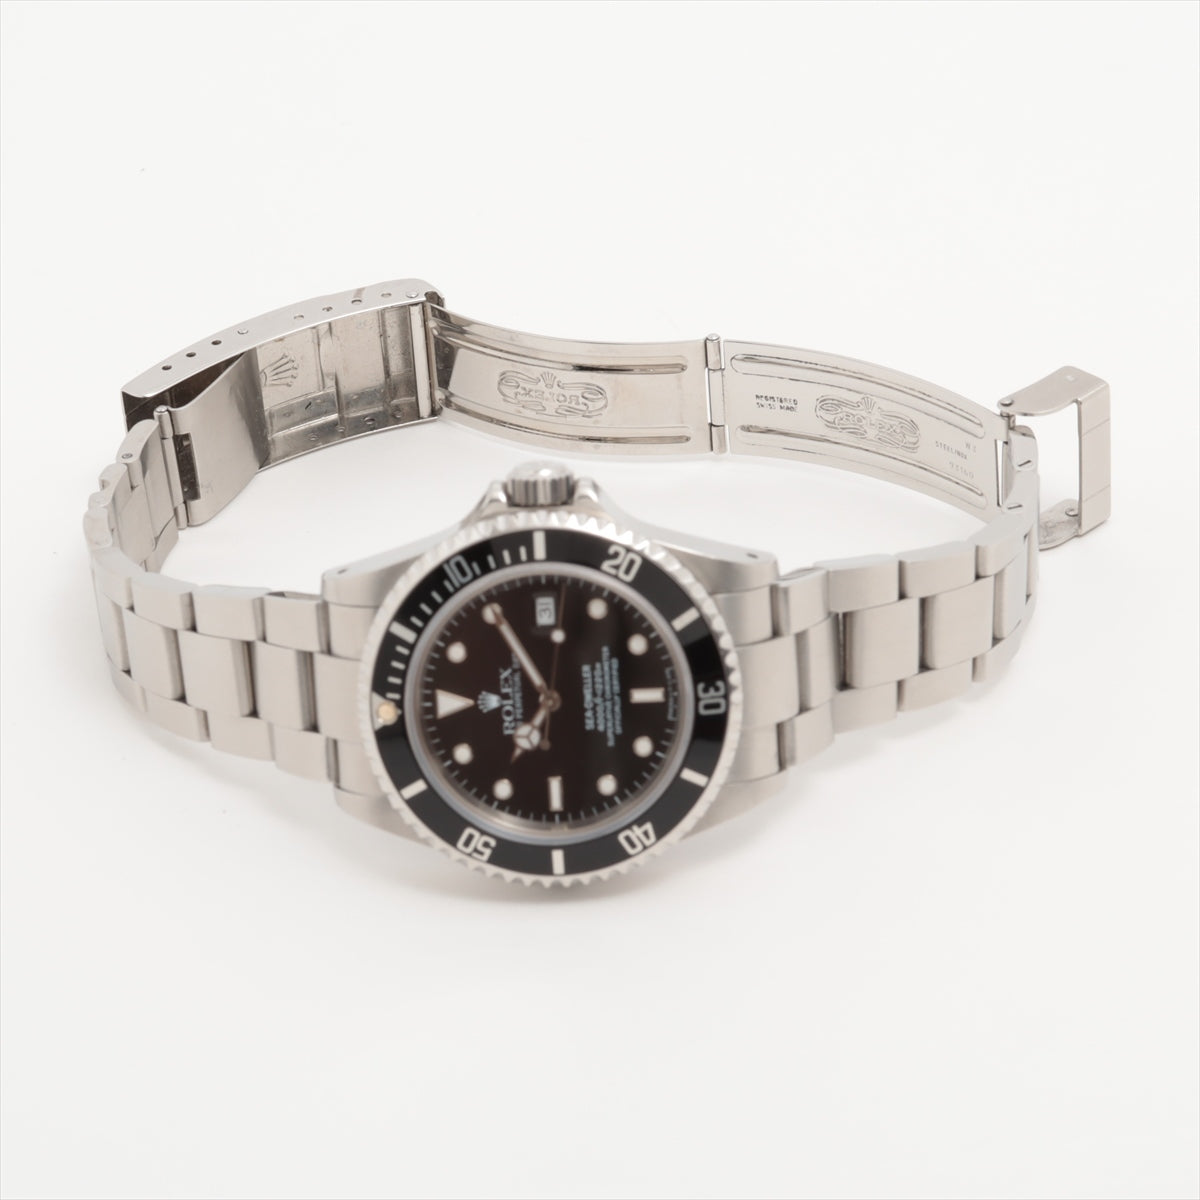 Rolex Sea-Dweller 16600 SS AT Black Dial 1 Extra Link